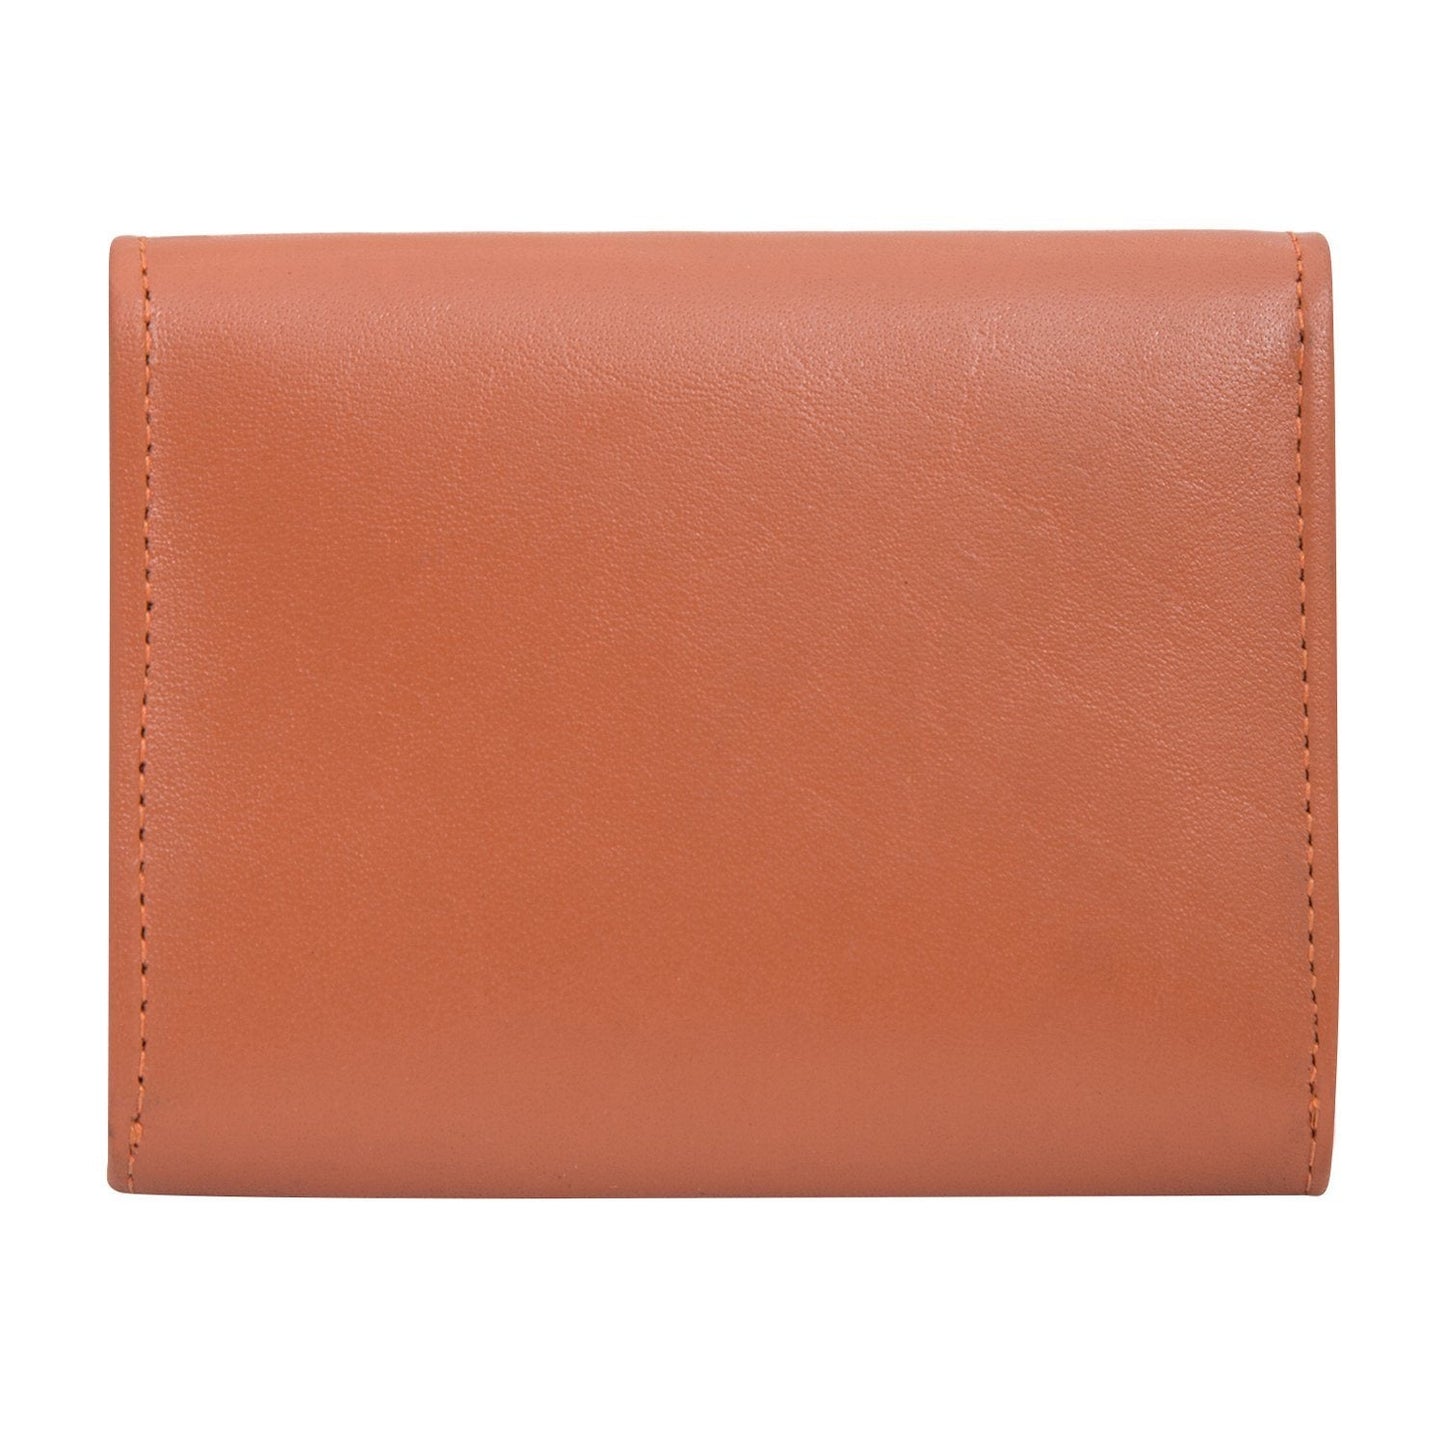 Tan Colour Italian Leather Card Holder/Slim Wallet (Holds Upto 16 Cards) Cathy London 